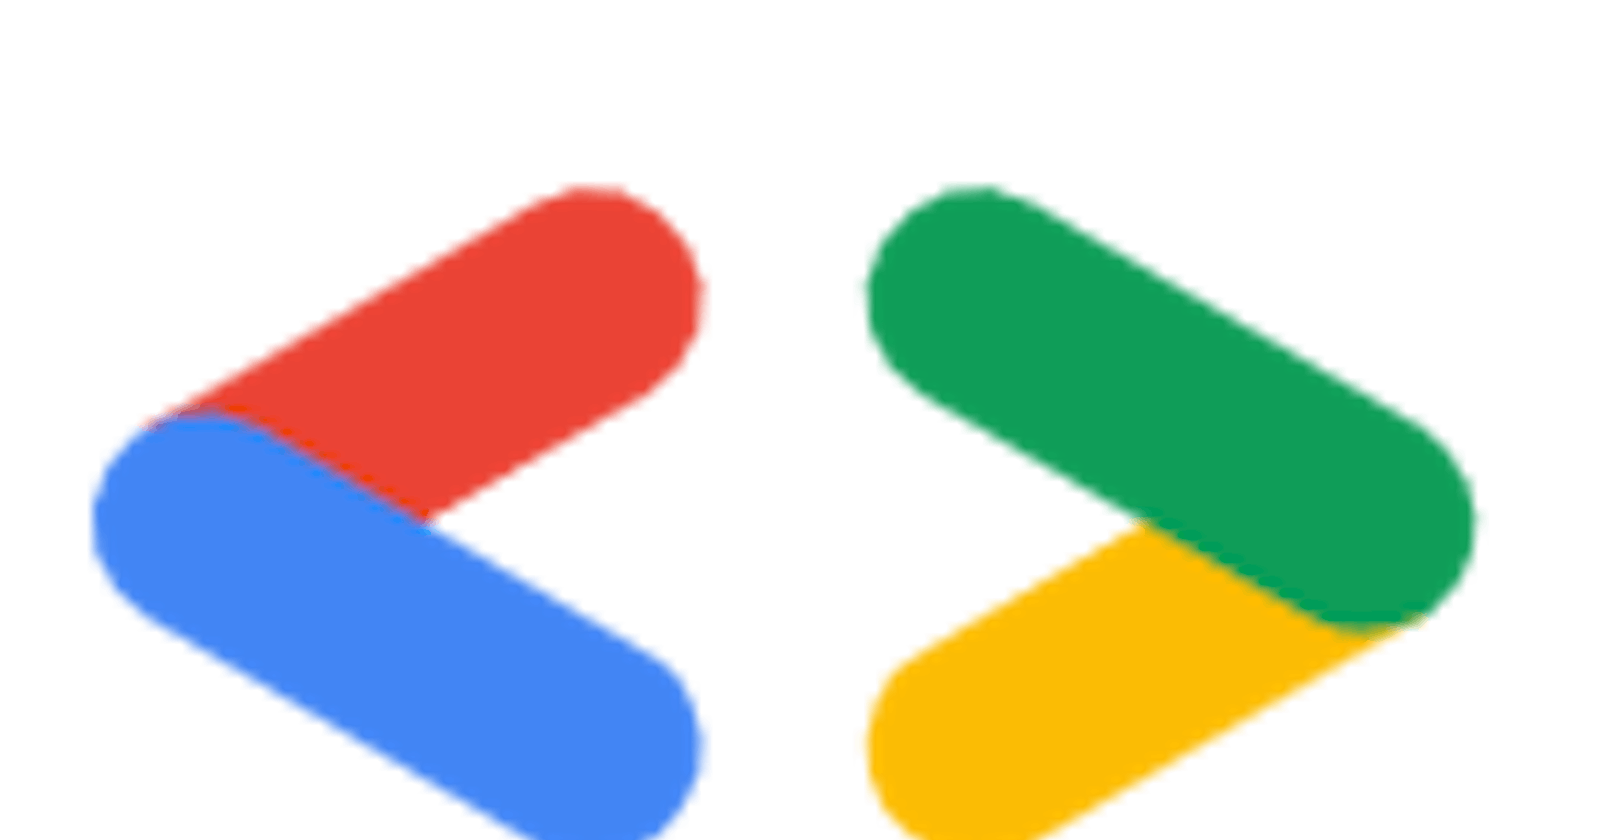 My 2019 journey with the Google Developers community and ALC 4.0.